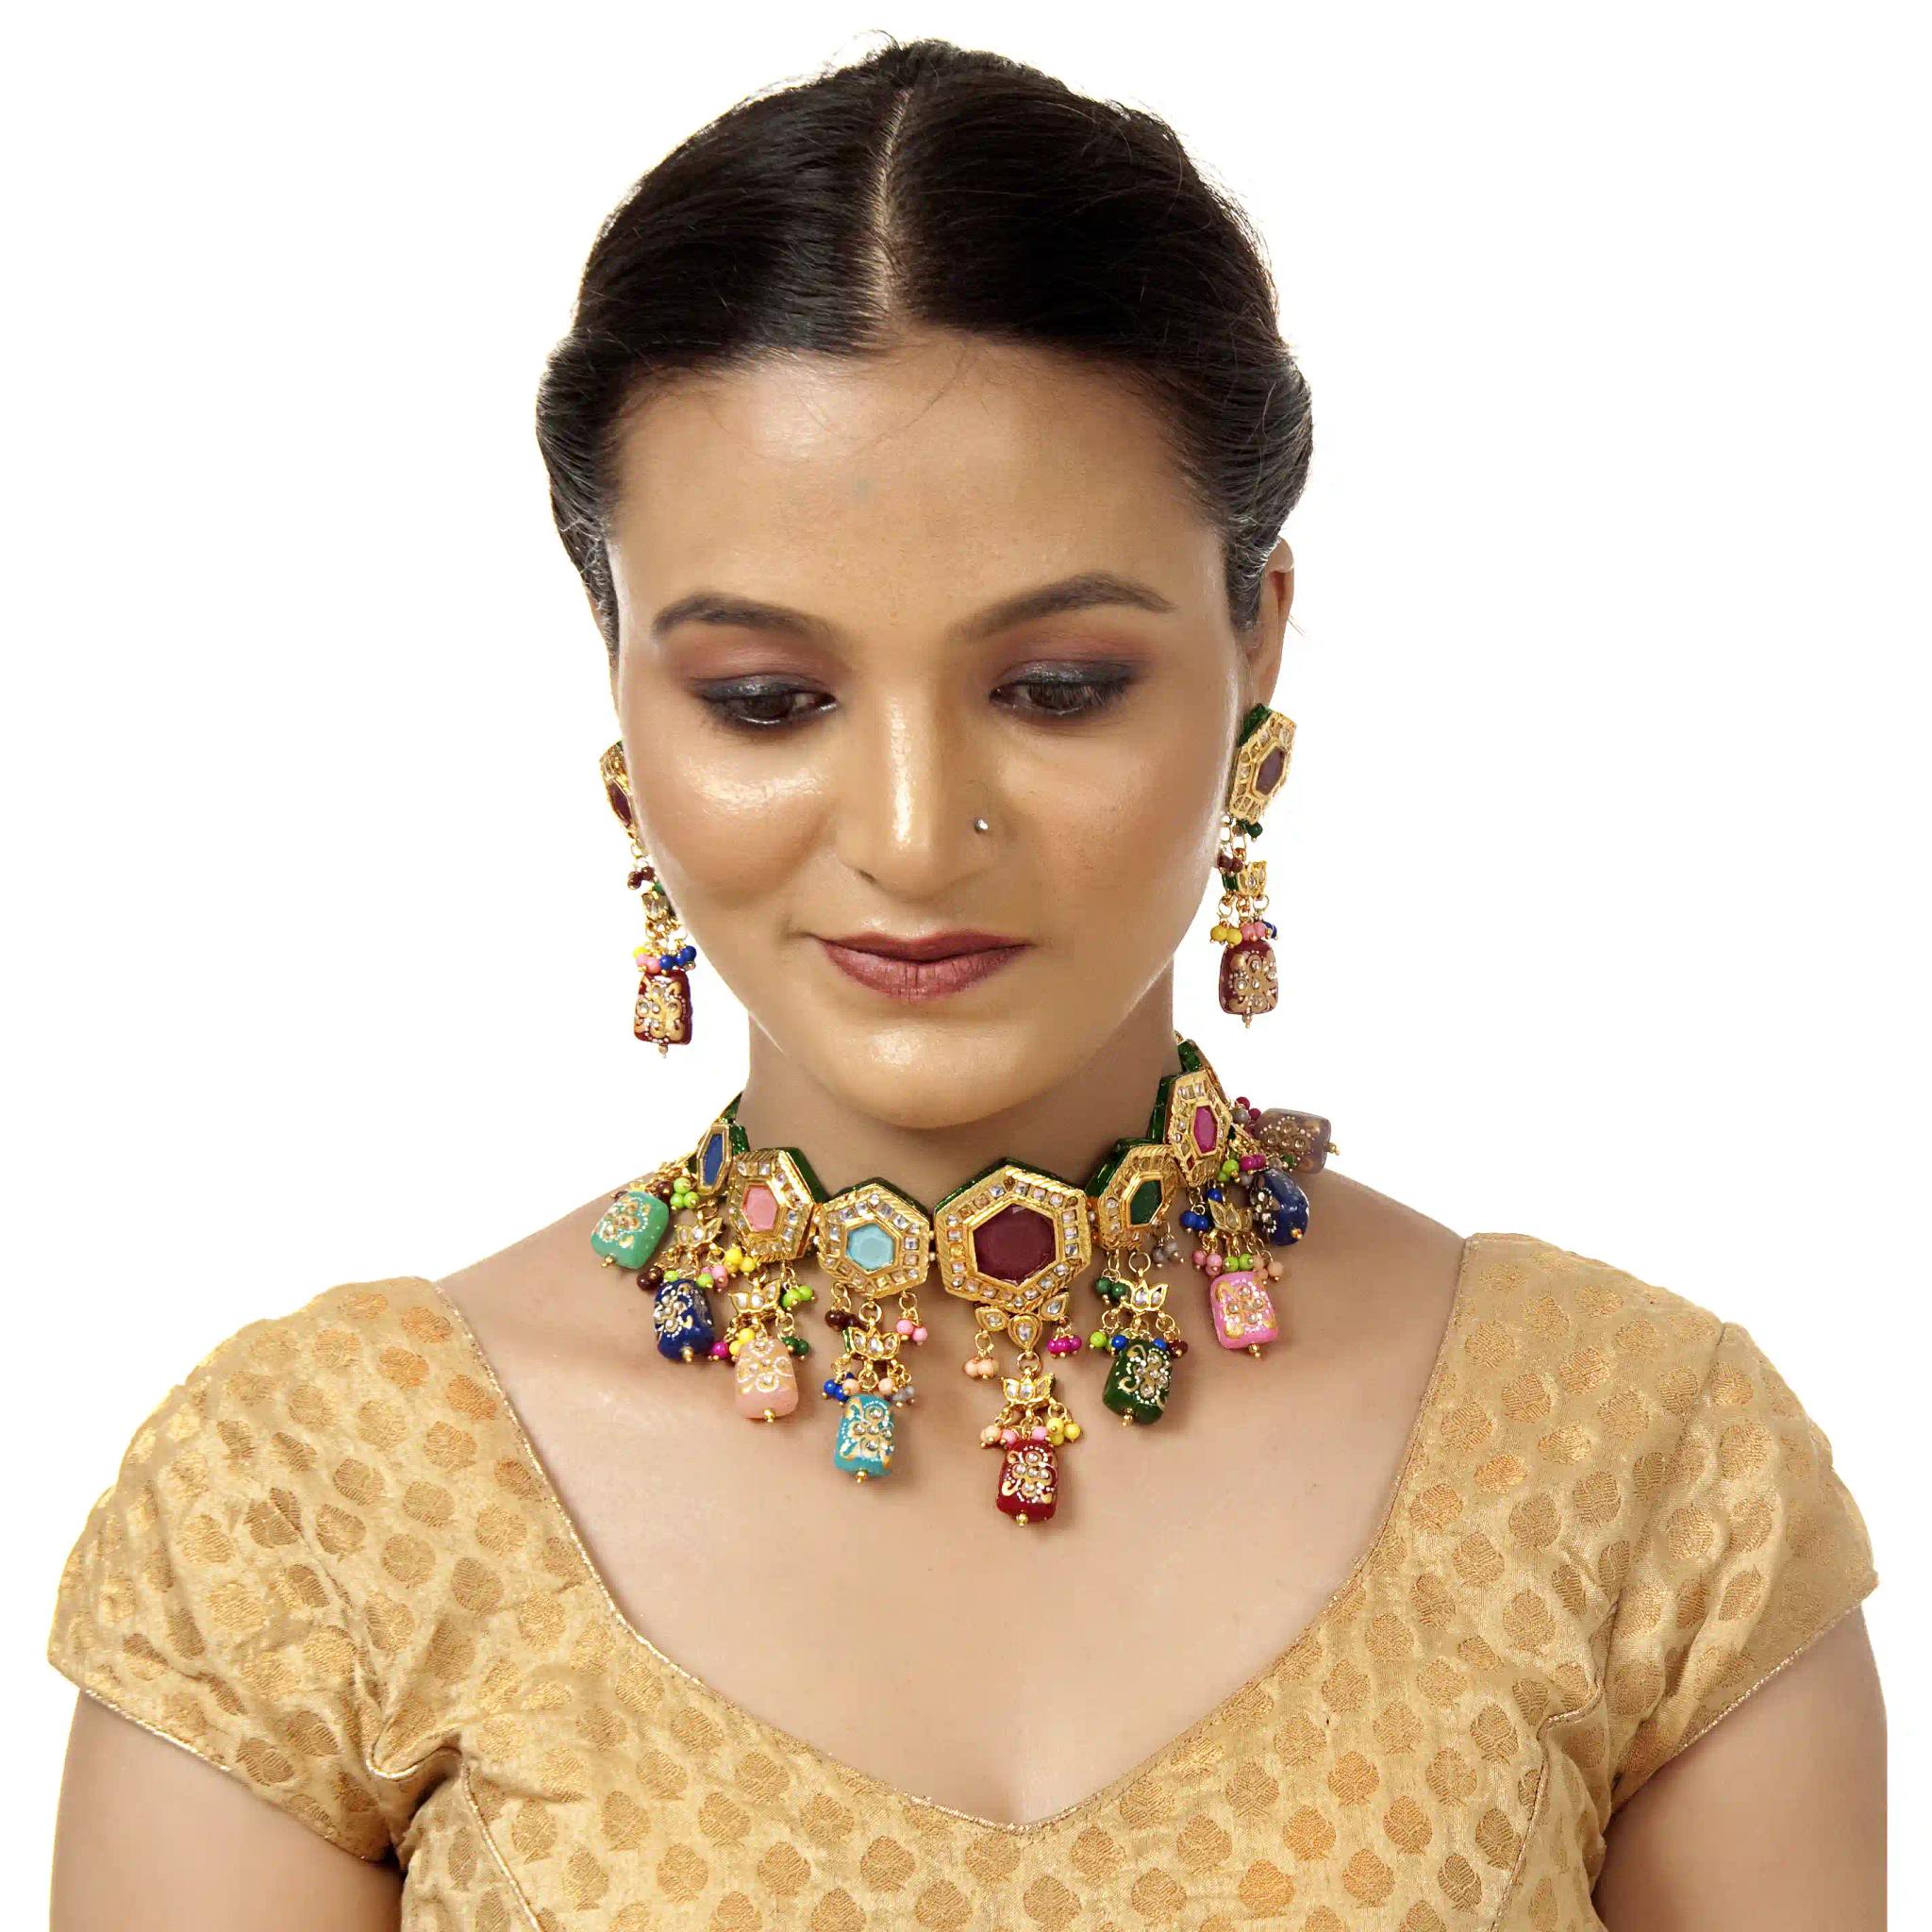 Gold Plated(18k) Hexagon Design Kundan Necklace & Earrings With Small Beads